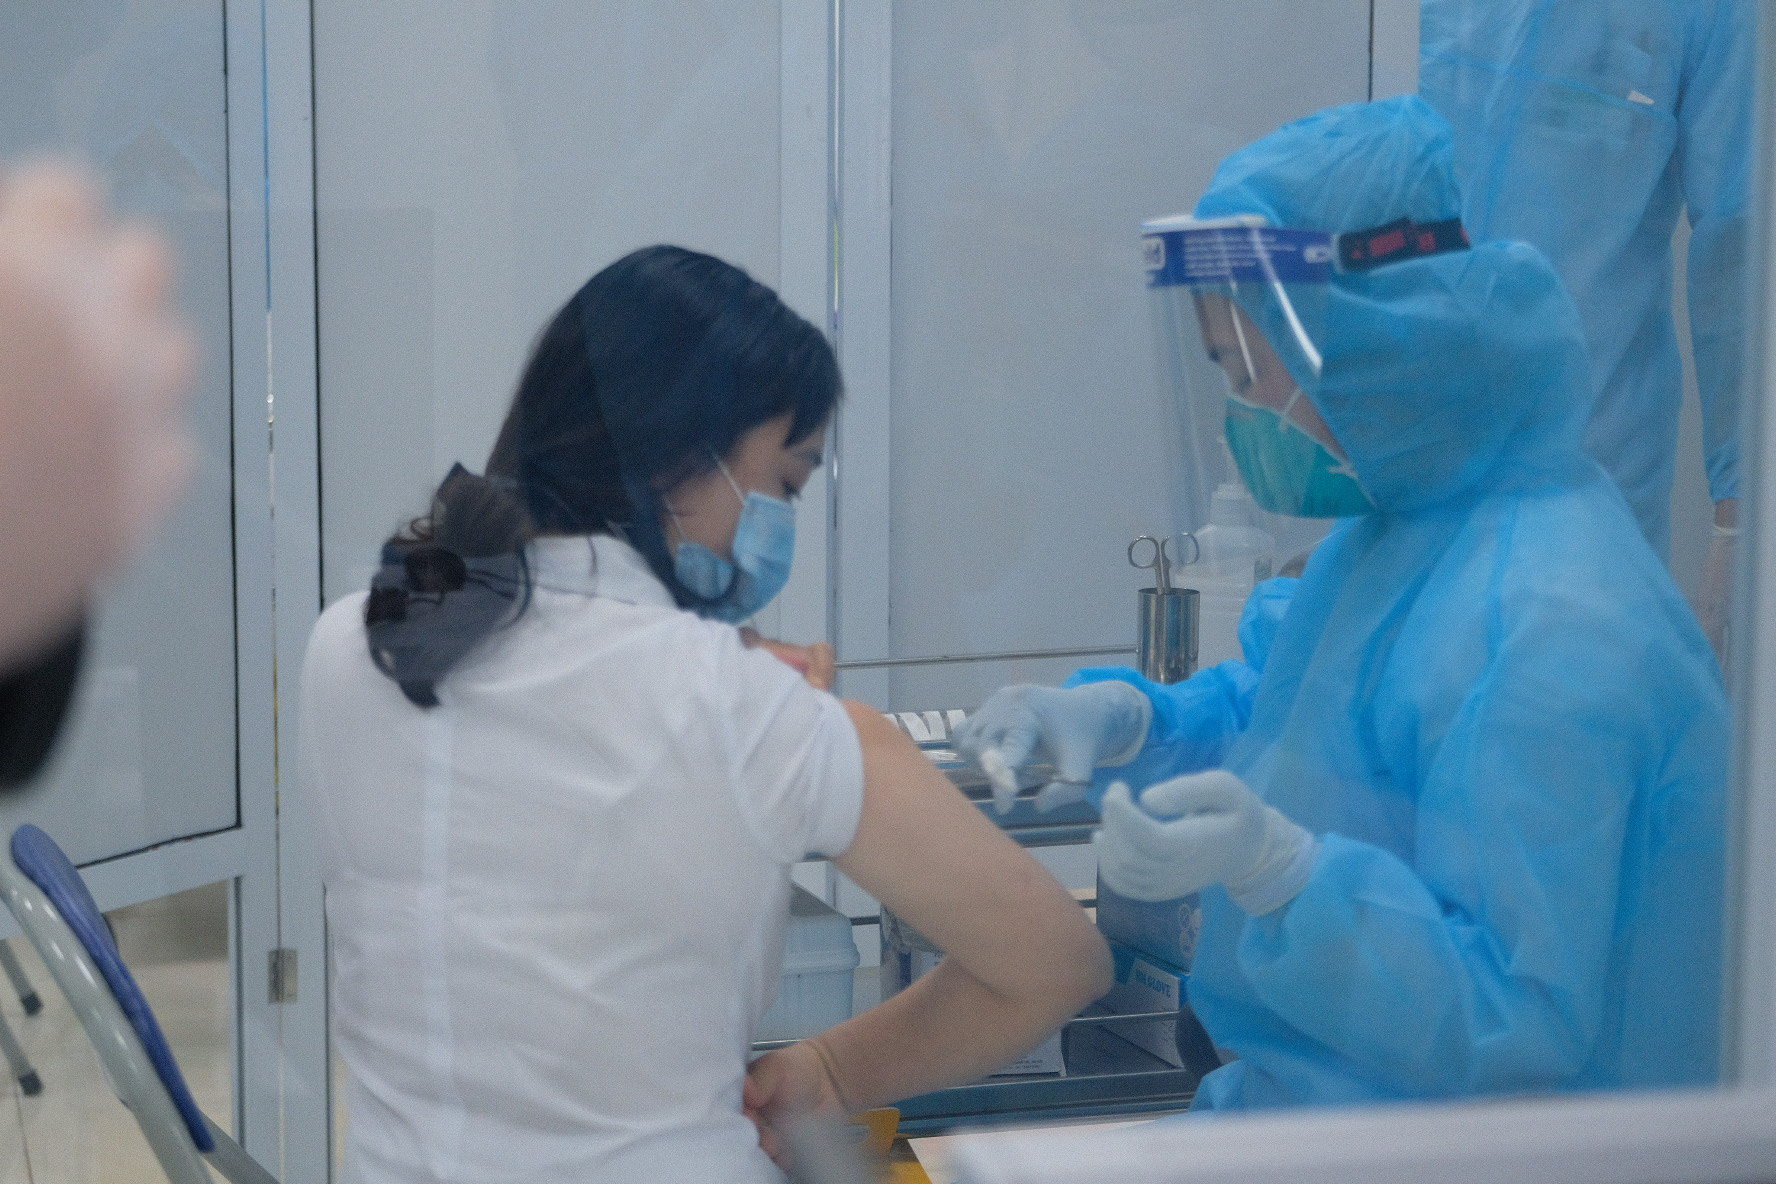 A health worker gets vaccinated at the National Hospital for Tropical Diseases in Hanoi, March 8, 2021. Photo: Nam Tran / Tuoi Tre